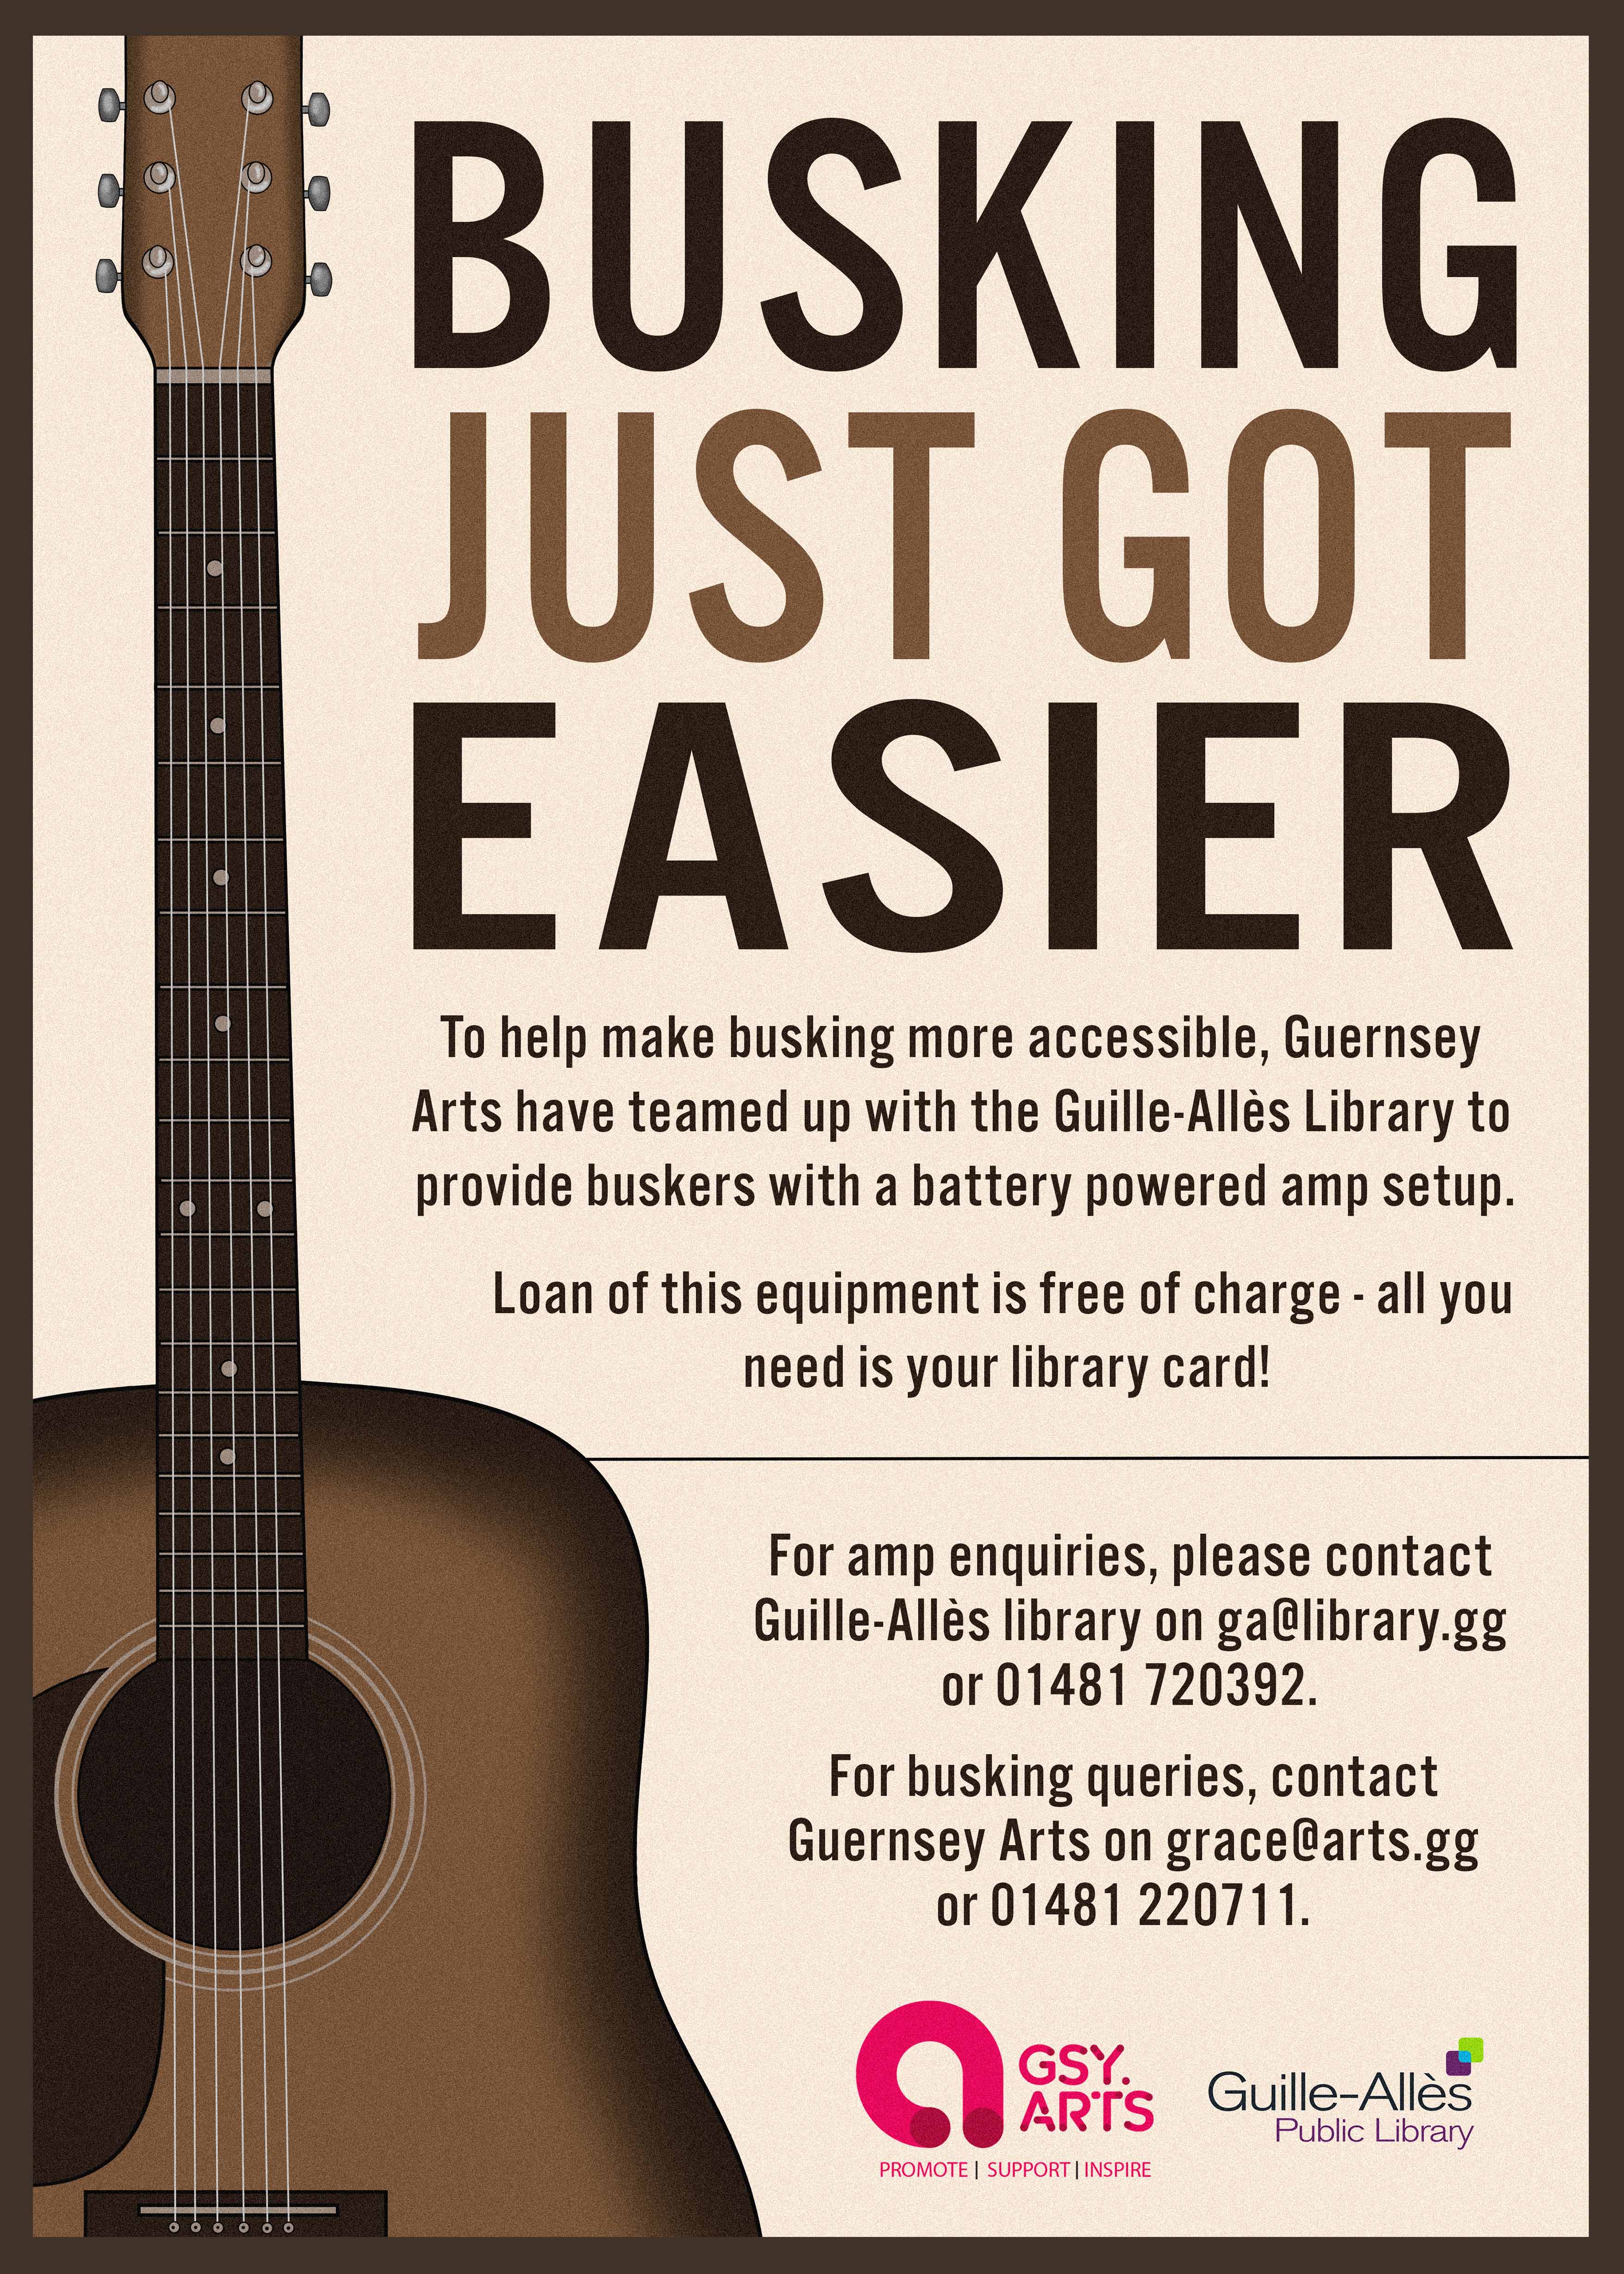 GUERNSEY ARTS PARTNERSHIP WITH GUILLE-ALLÈS LIBRARY - BUSKING AMP TO LOAN